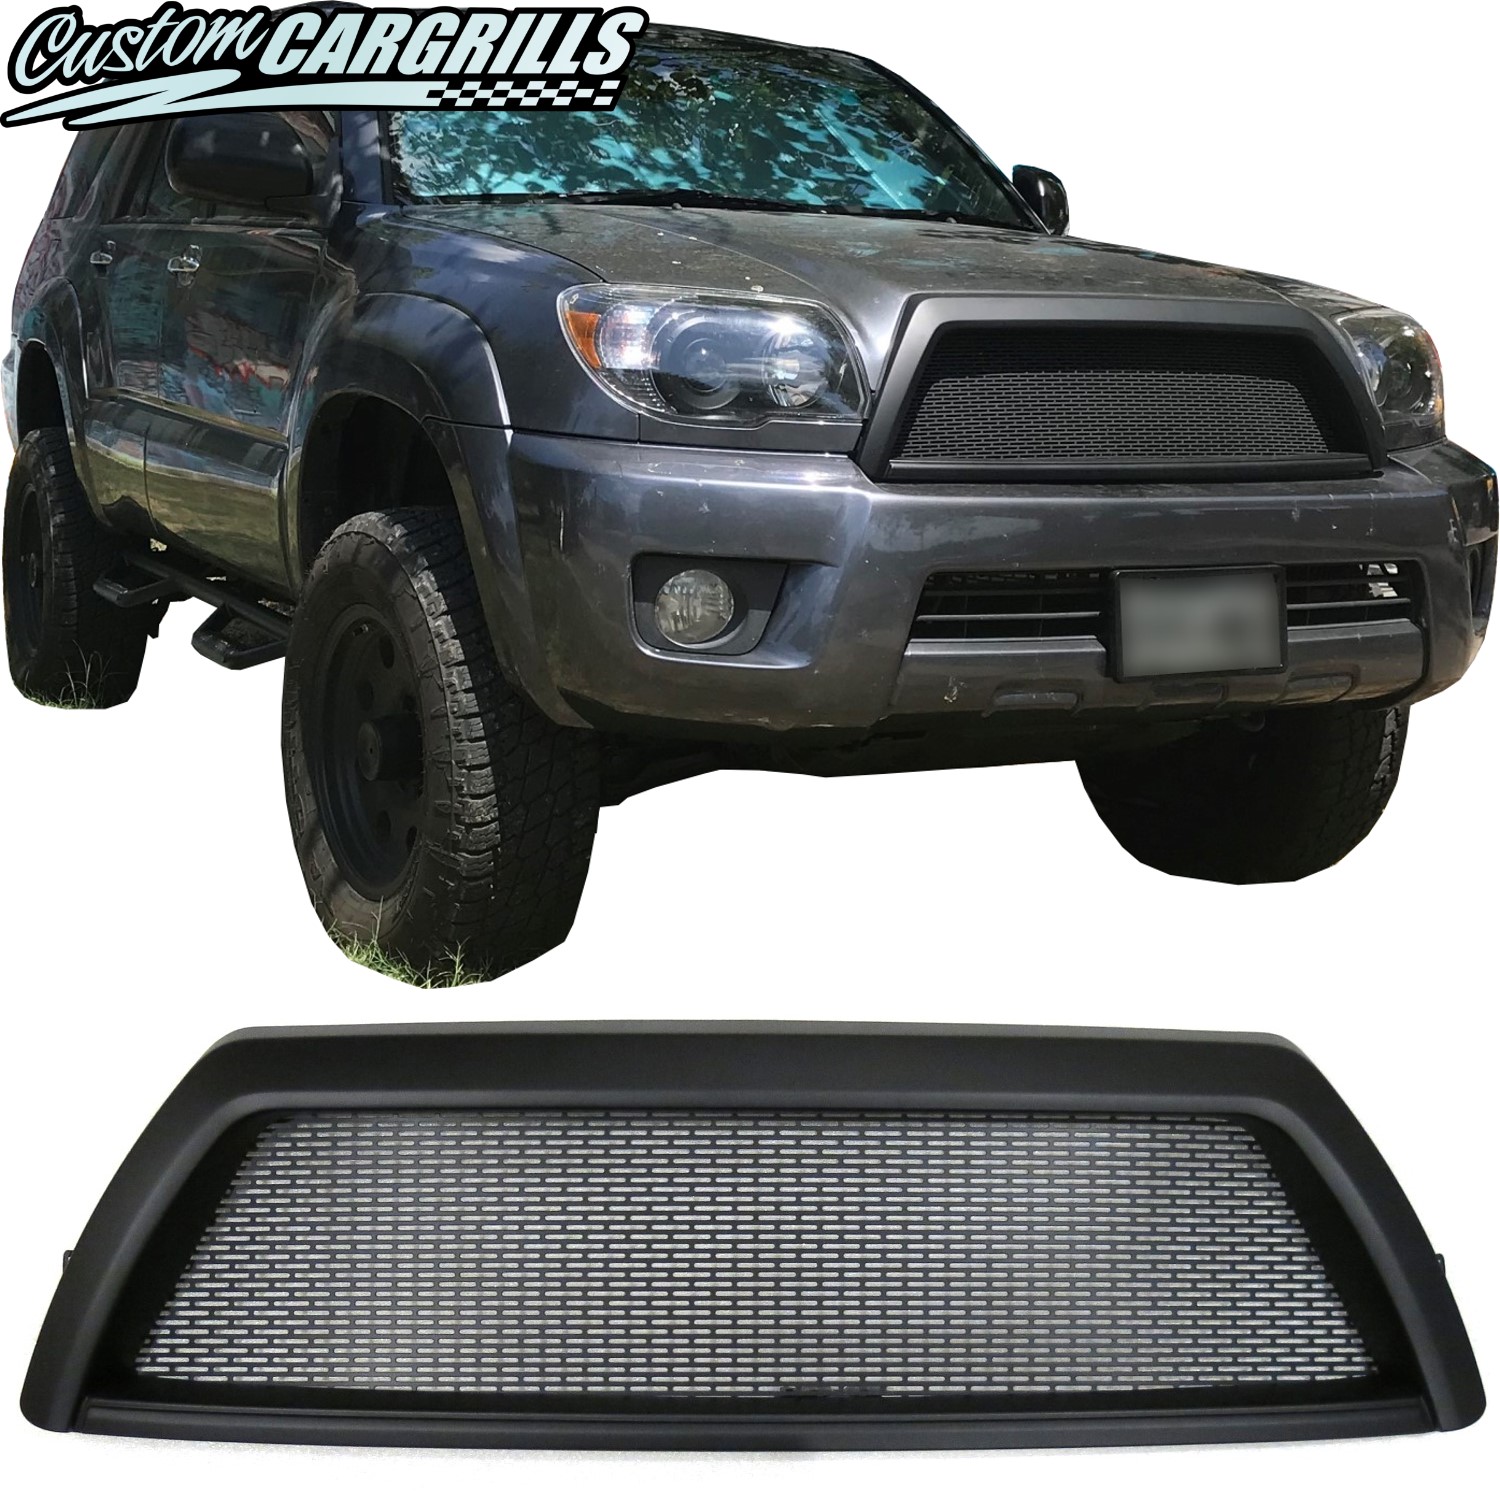 2006 - 2009 Toyota 4Runner Full Replacement Satoshi Grille #1